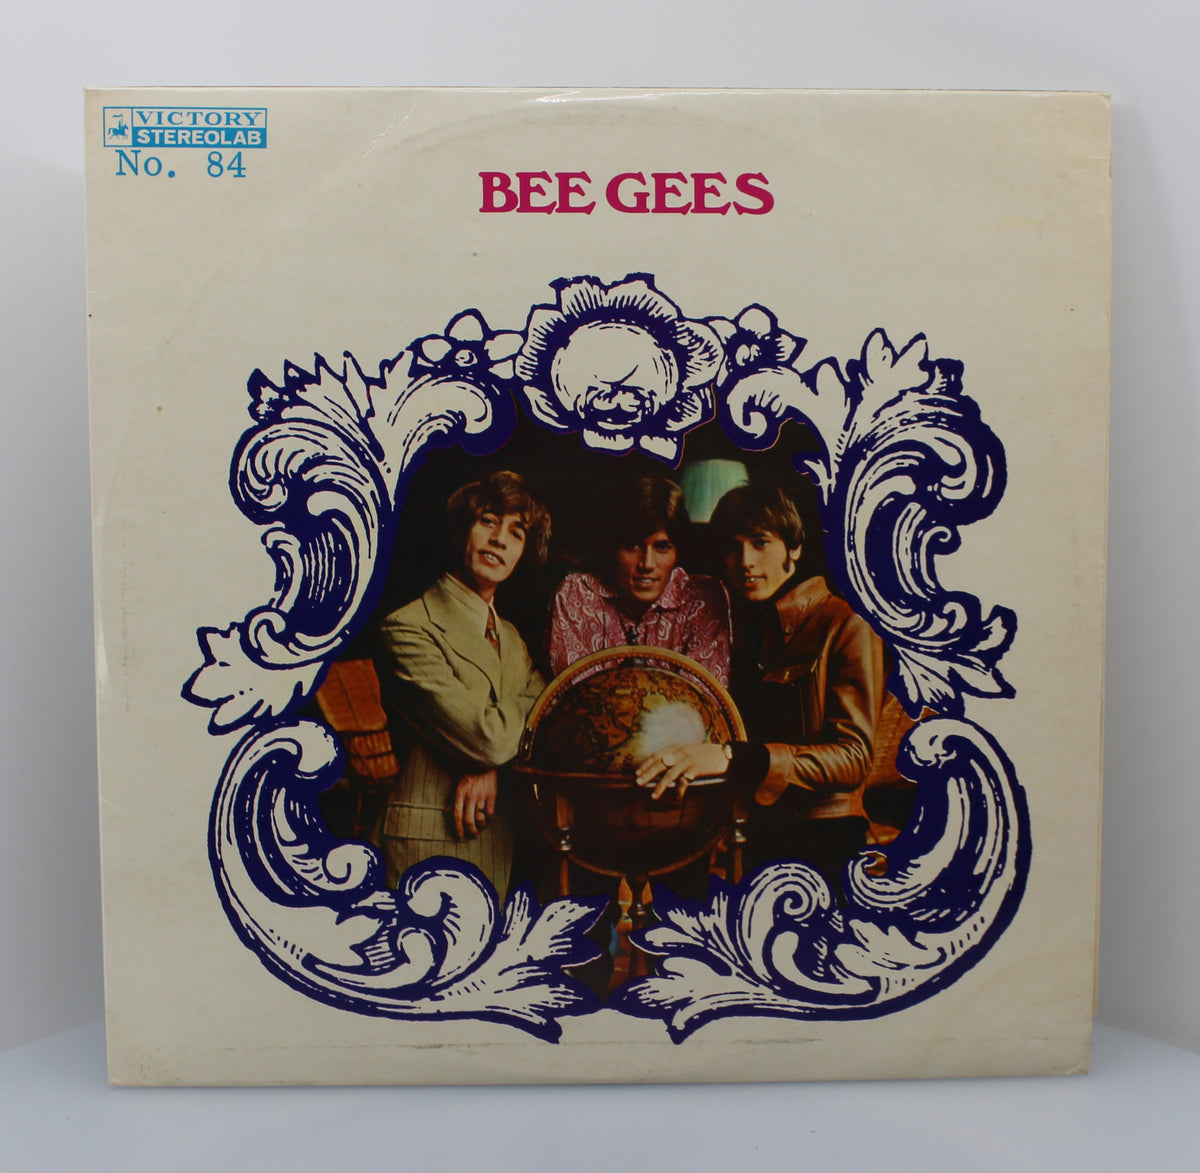 Bee Gees – Bee Gees, Vinyl, LP, Compilation, Unofficial Release, Stereo, Mono, Japan